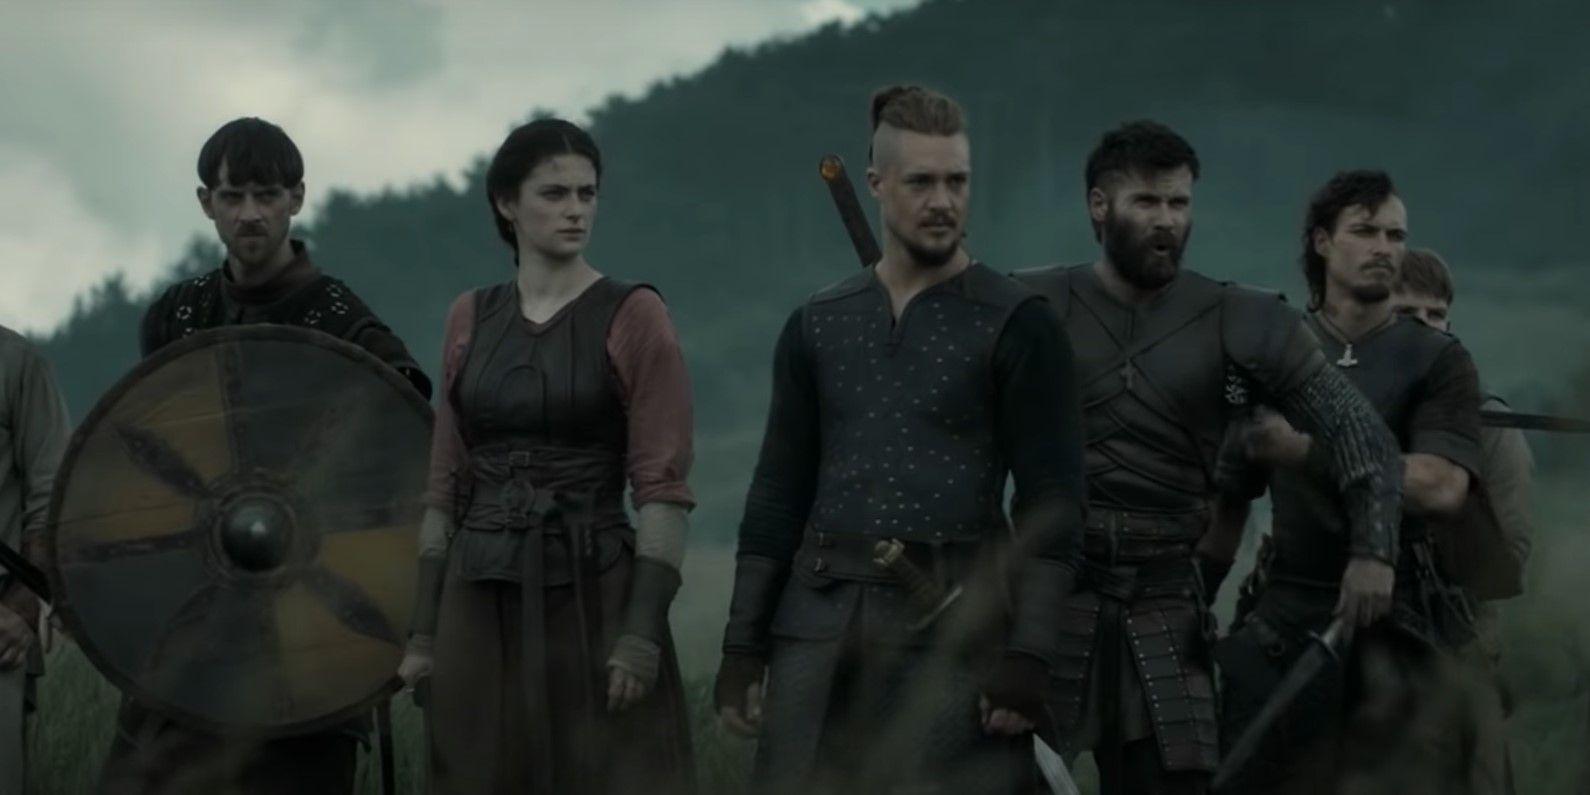 Uhtred and his friends preparing for battle